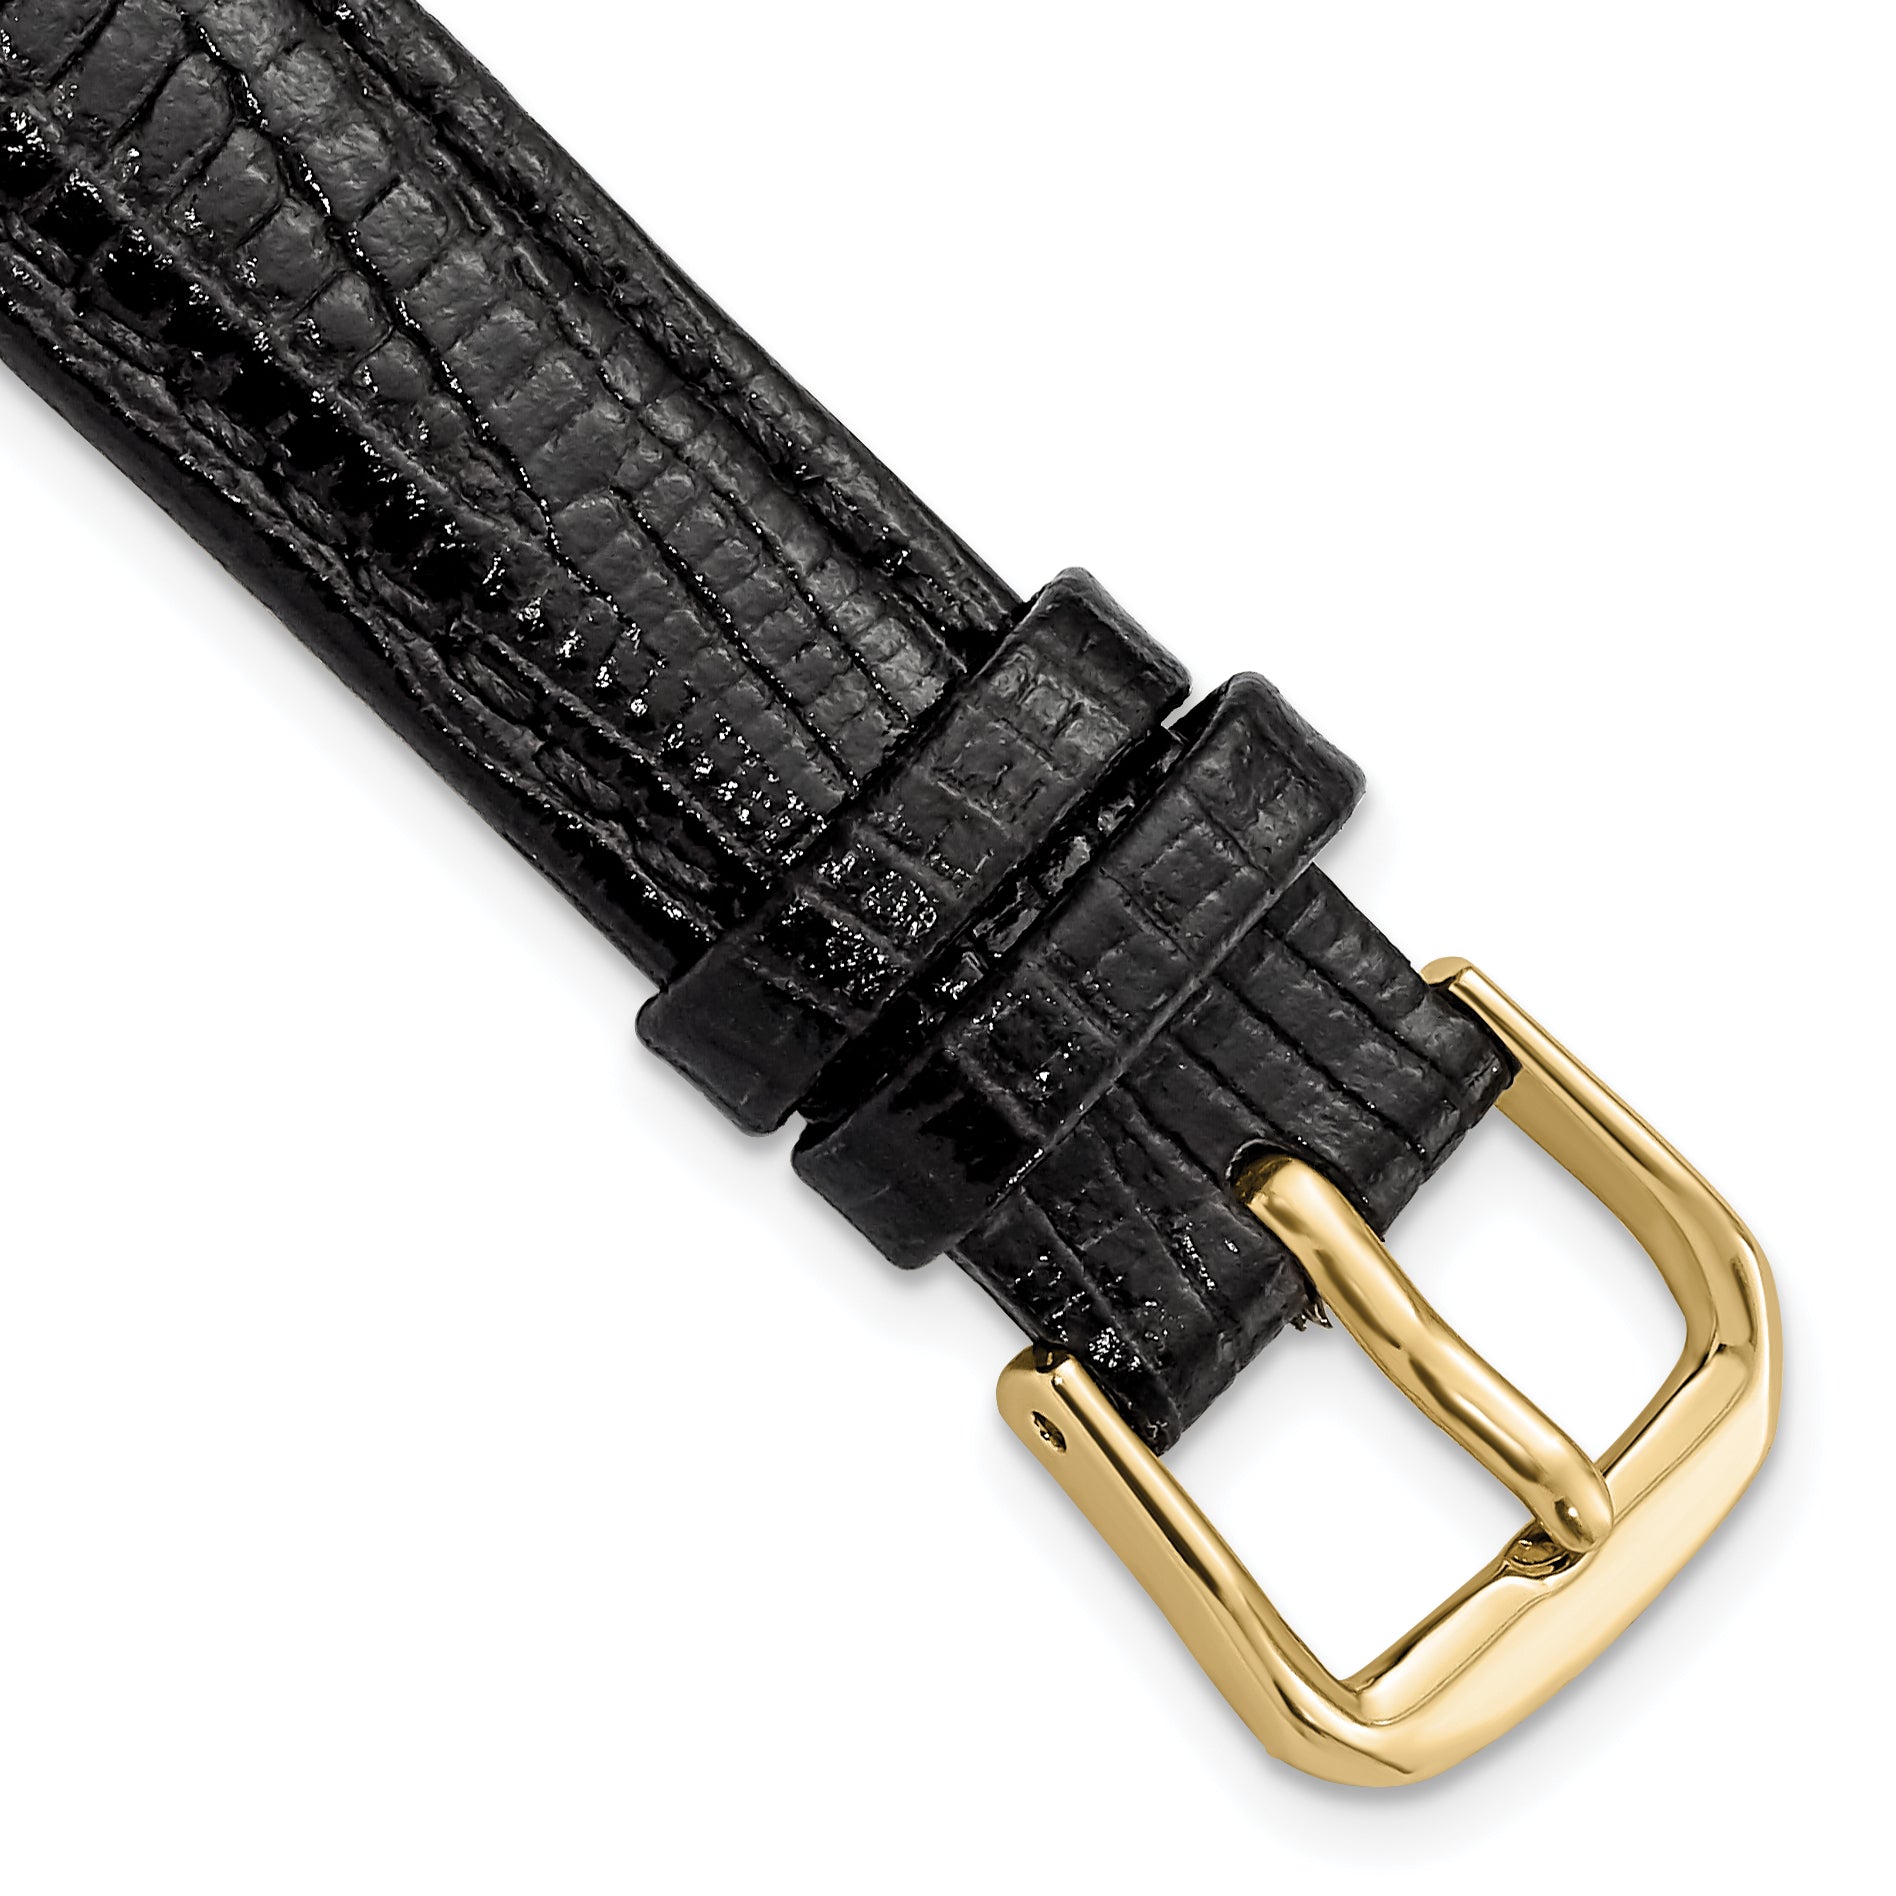 DeBeer 14mm Black Snake Grain Leather with Gold-tone Buckle 6.75 inch Watch Band